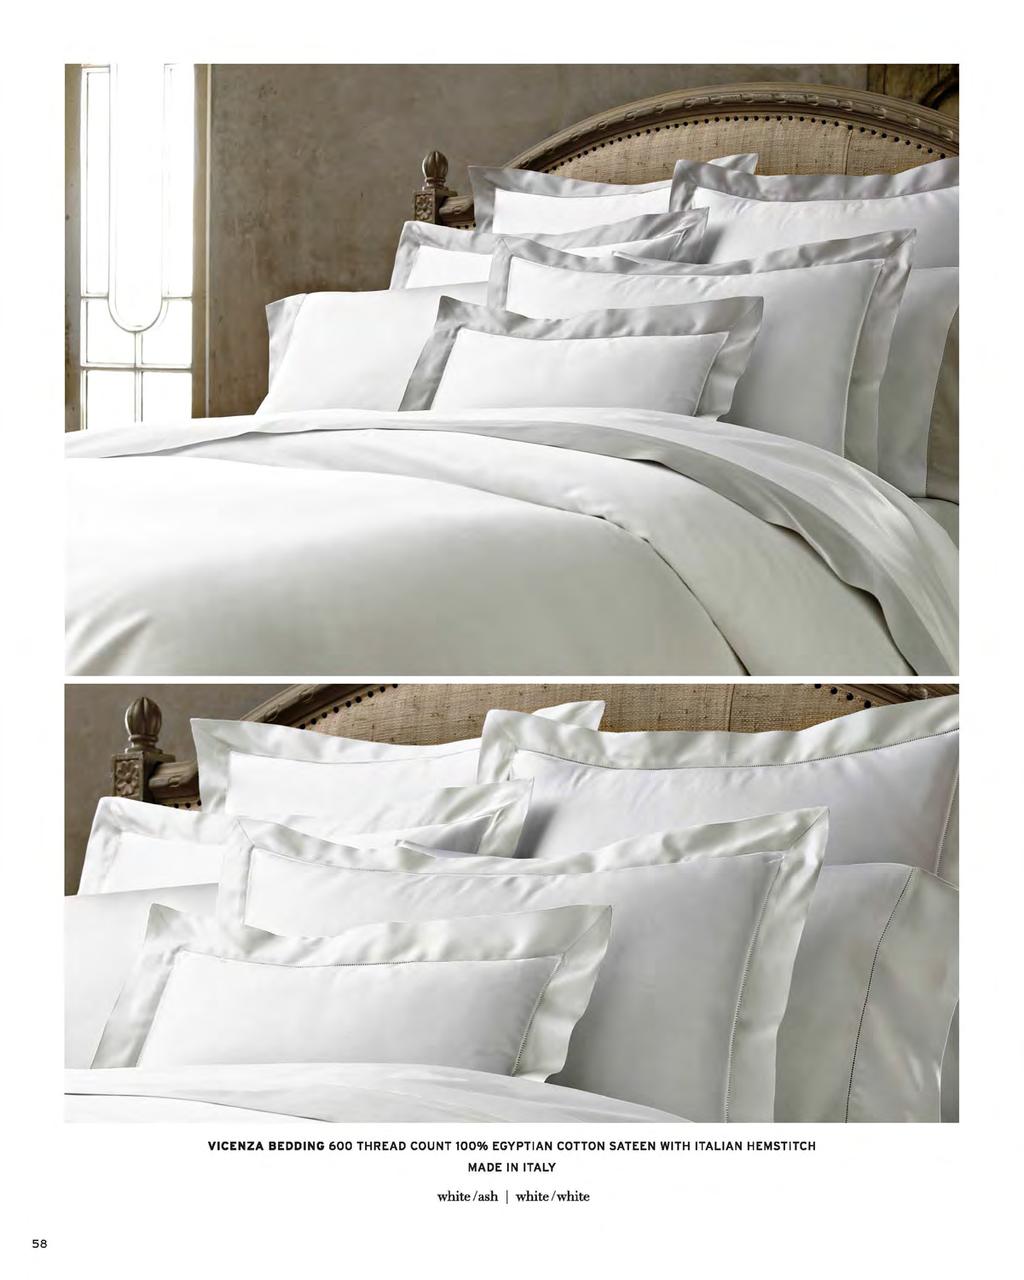 VICENZA BEDDING 600 THREAD COUNT 100% EGYPTIAN COTTON SATEEN